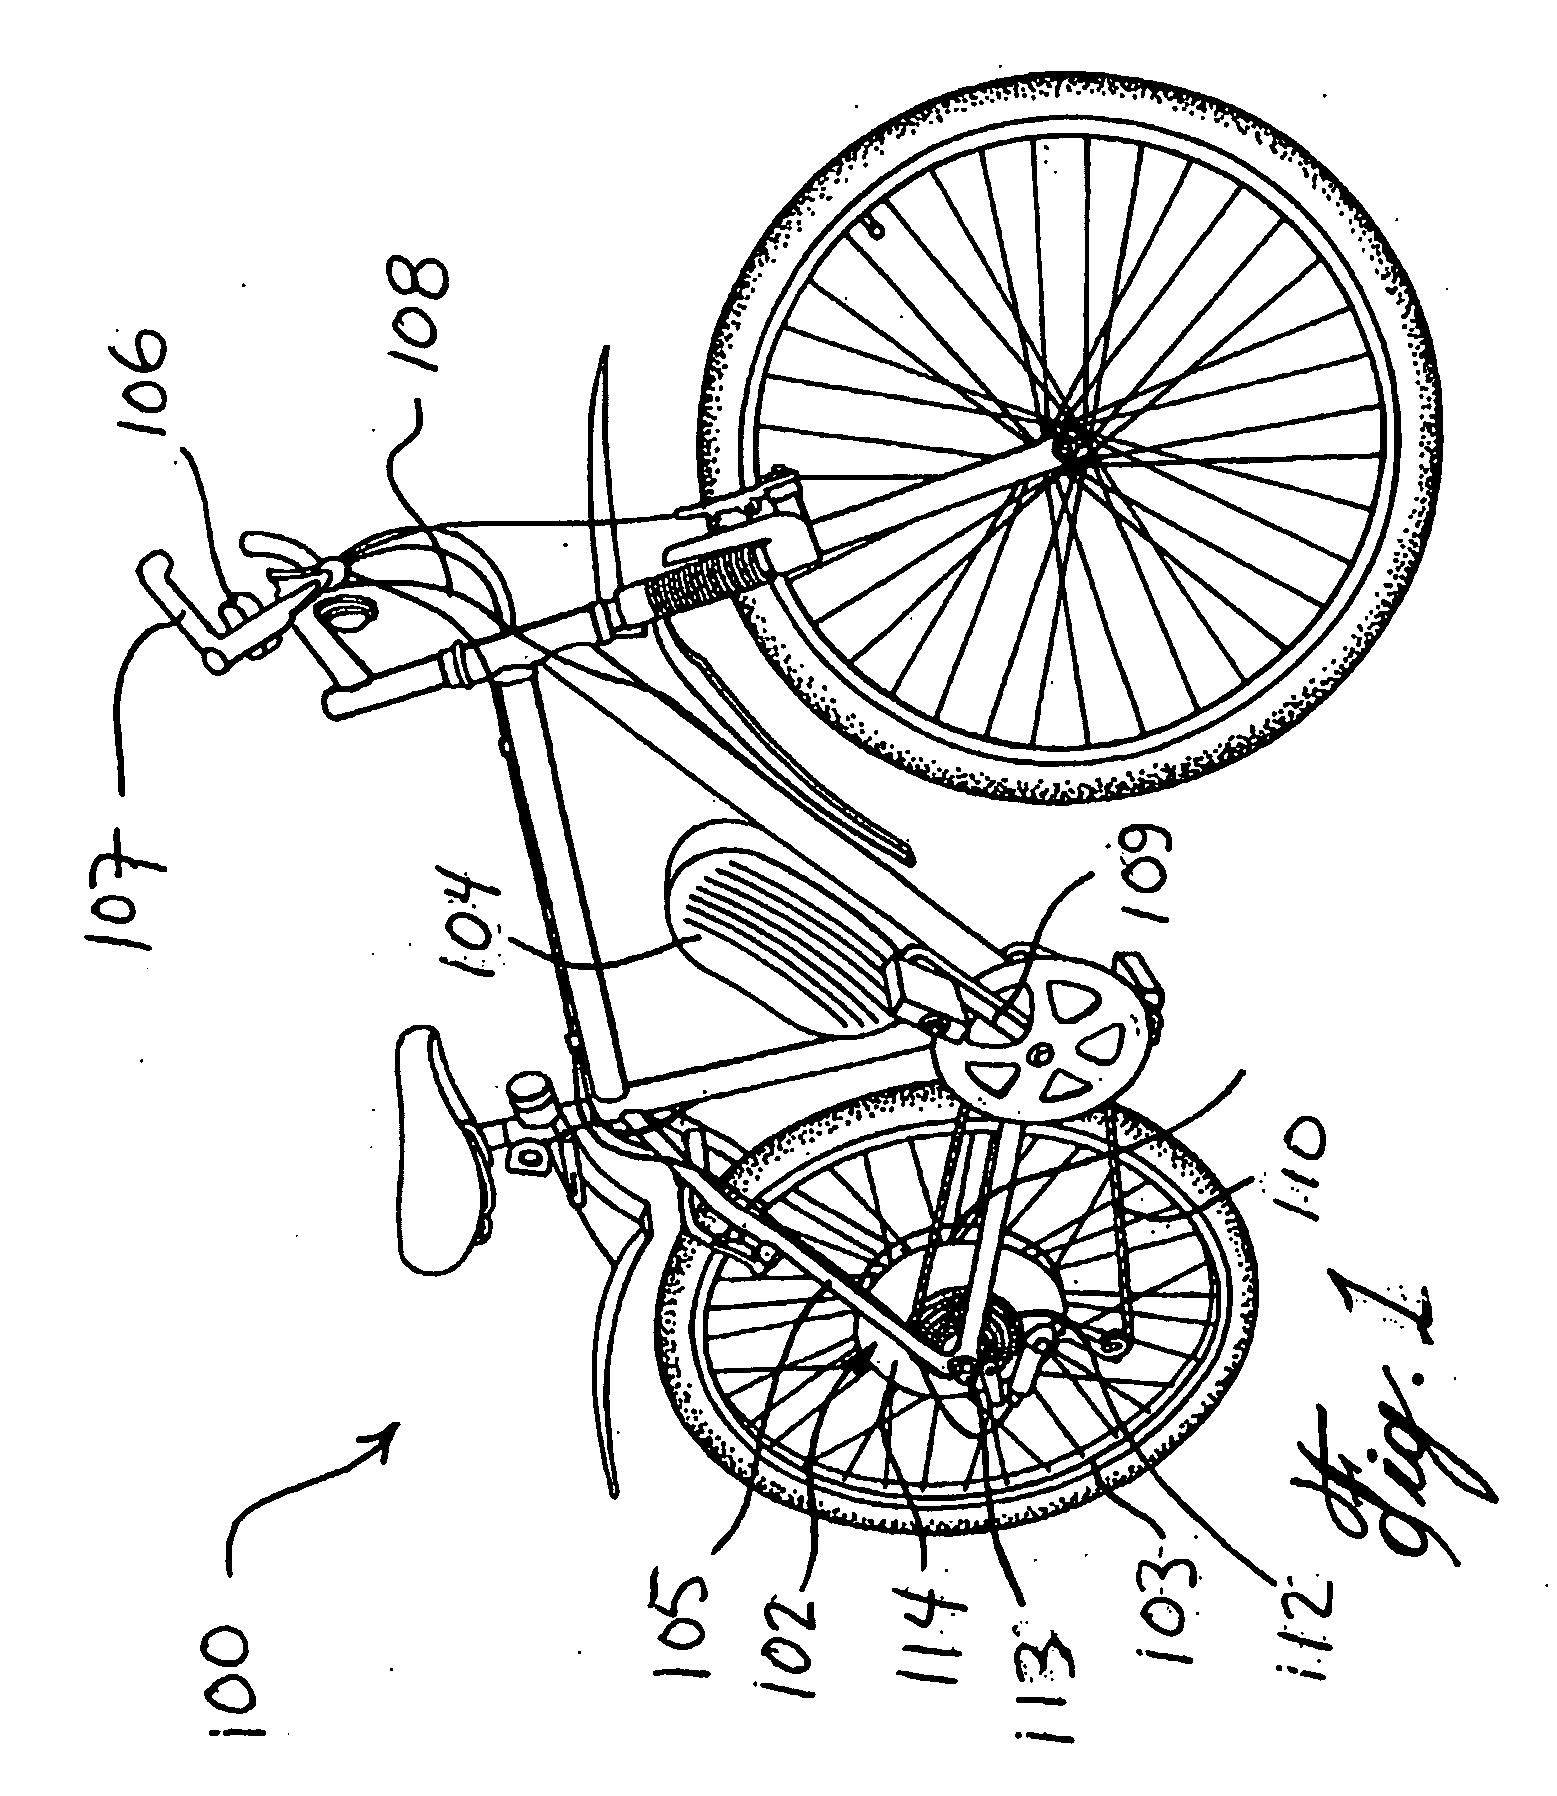 Energy Management System for Motor-Assisted User-Propelled Vehicles